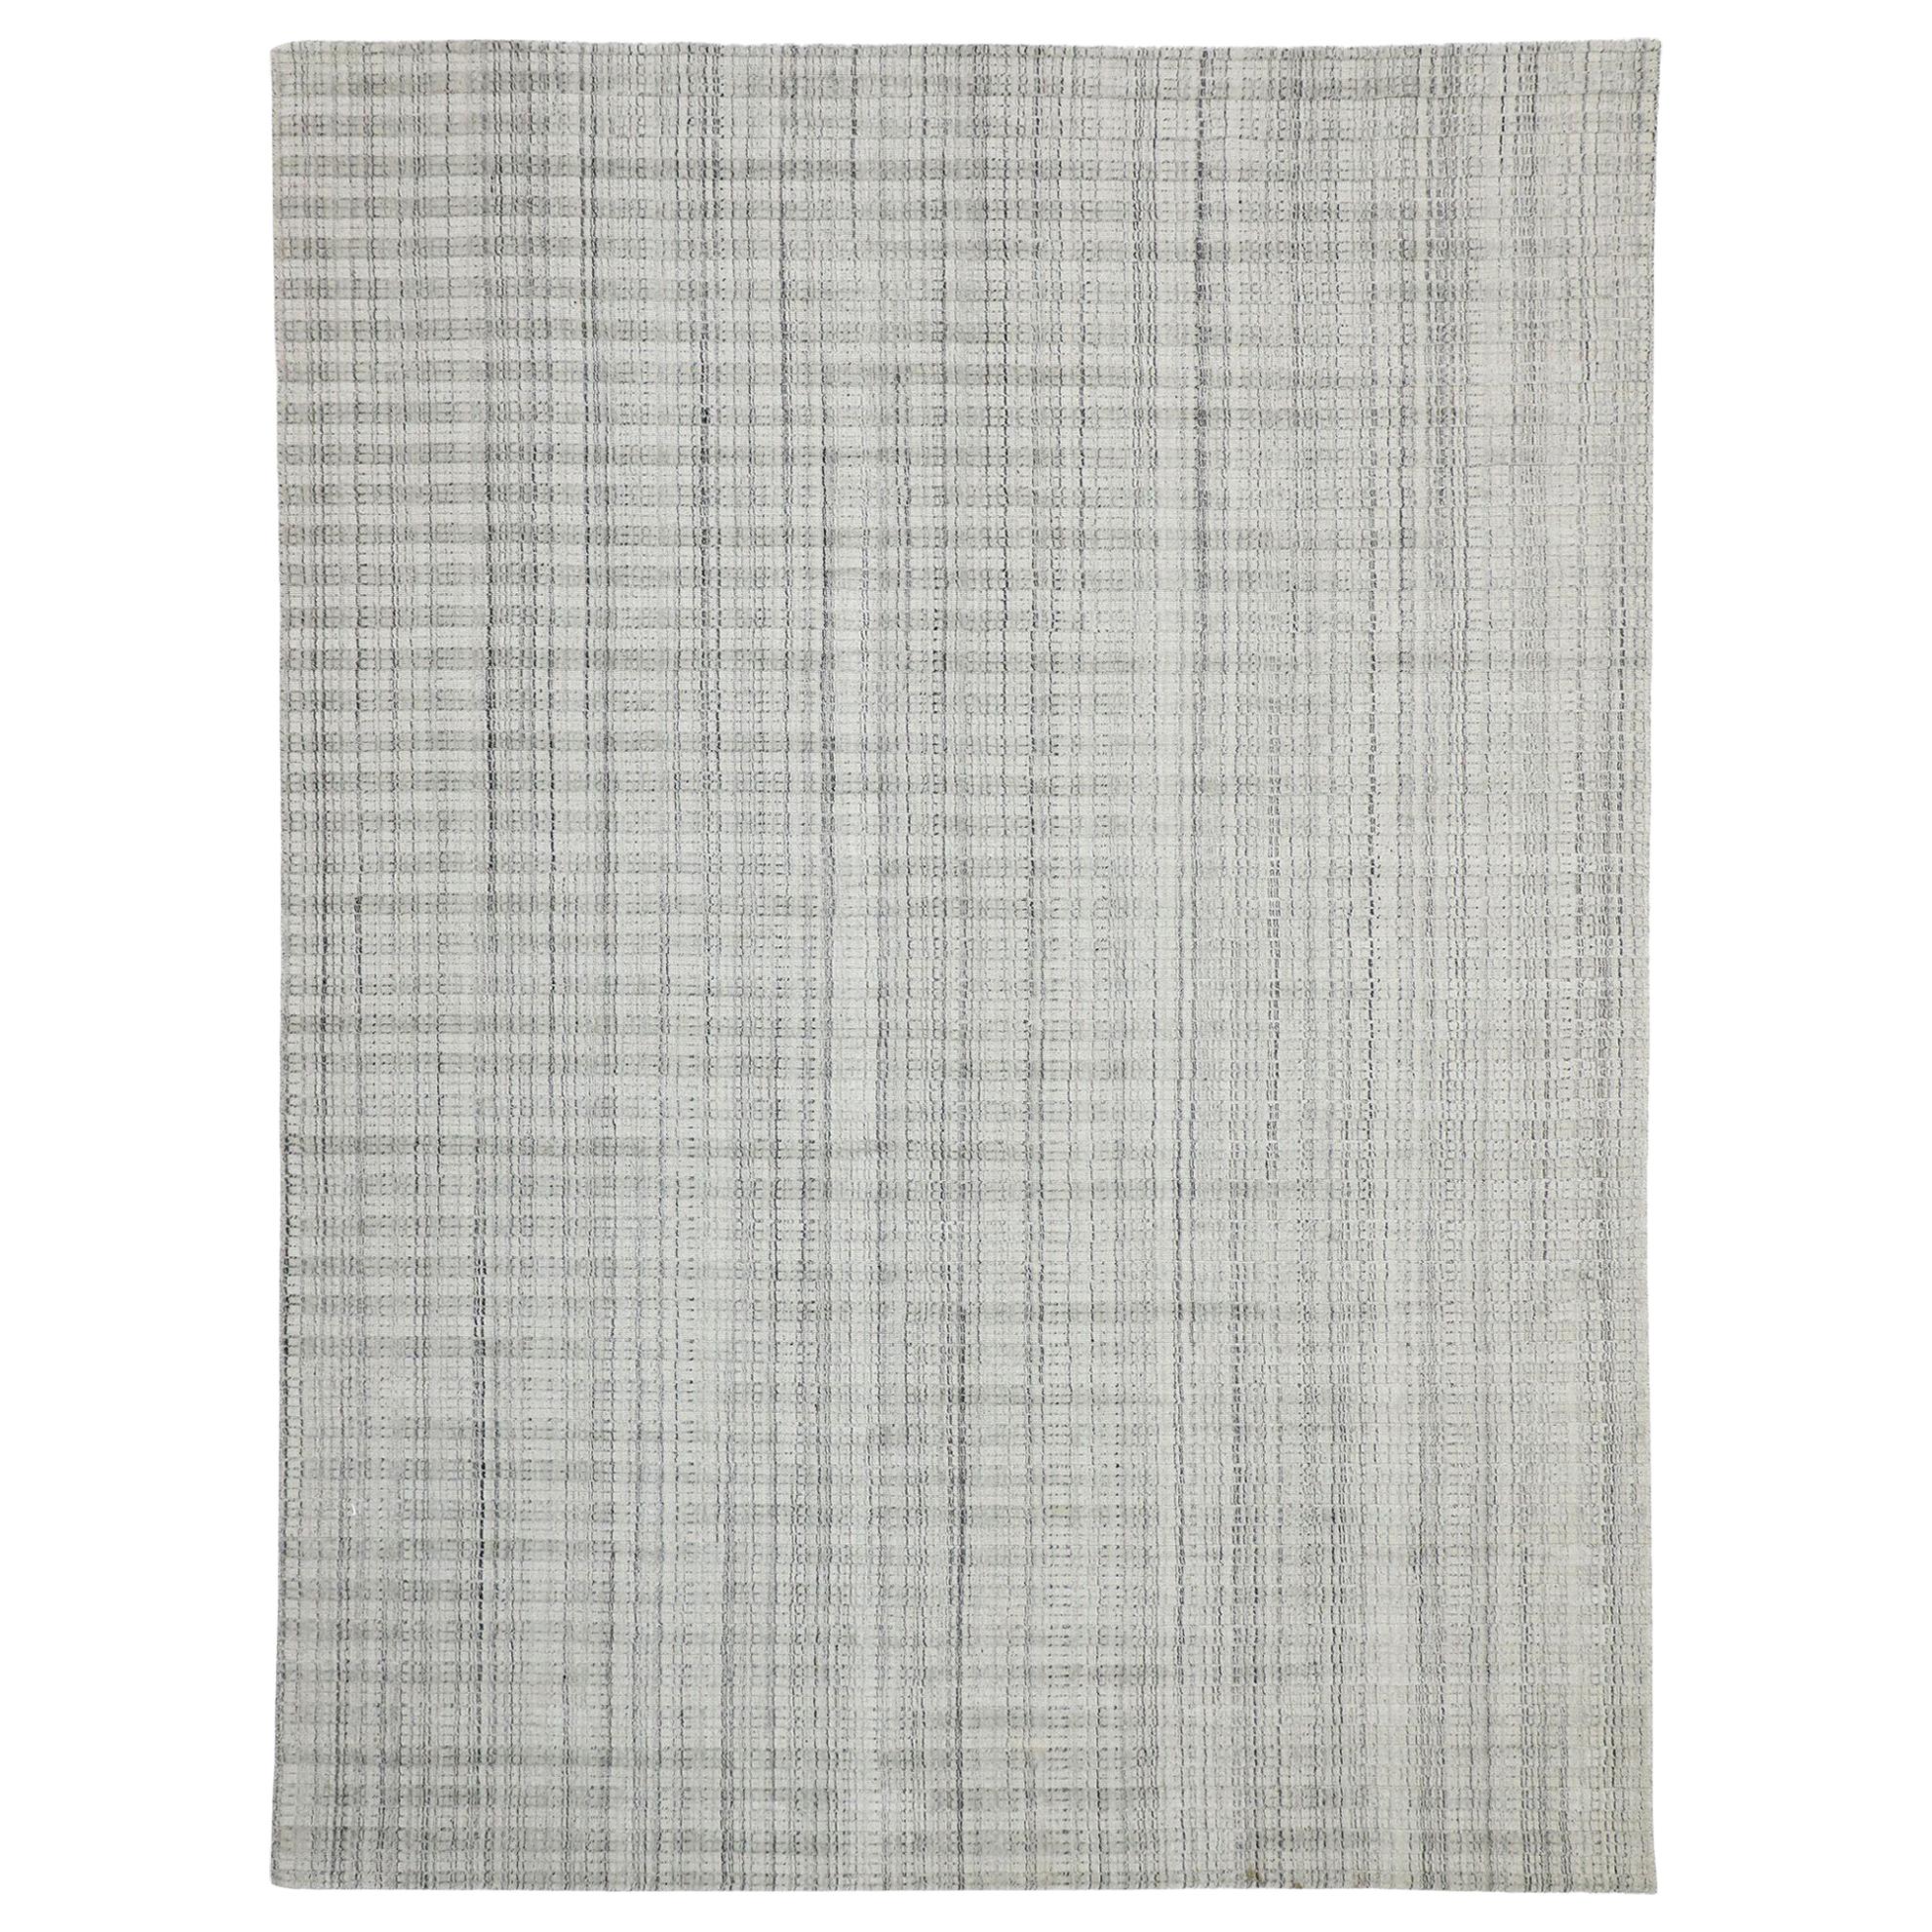 New Transitional Gray Area Rug with Swedish Gustavian Style, Texture Area Rug